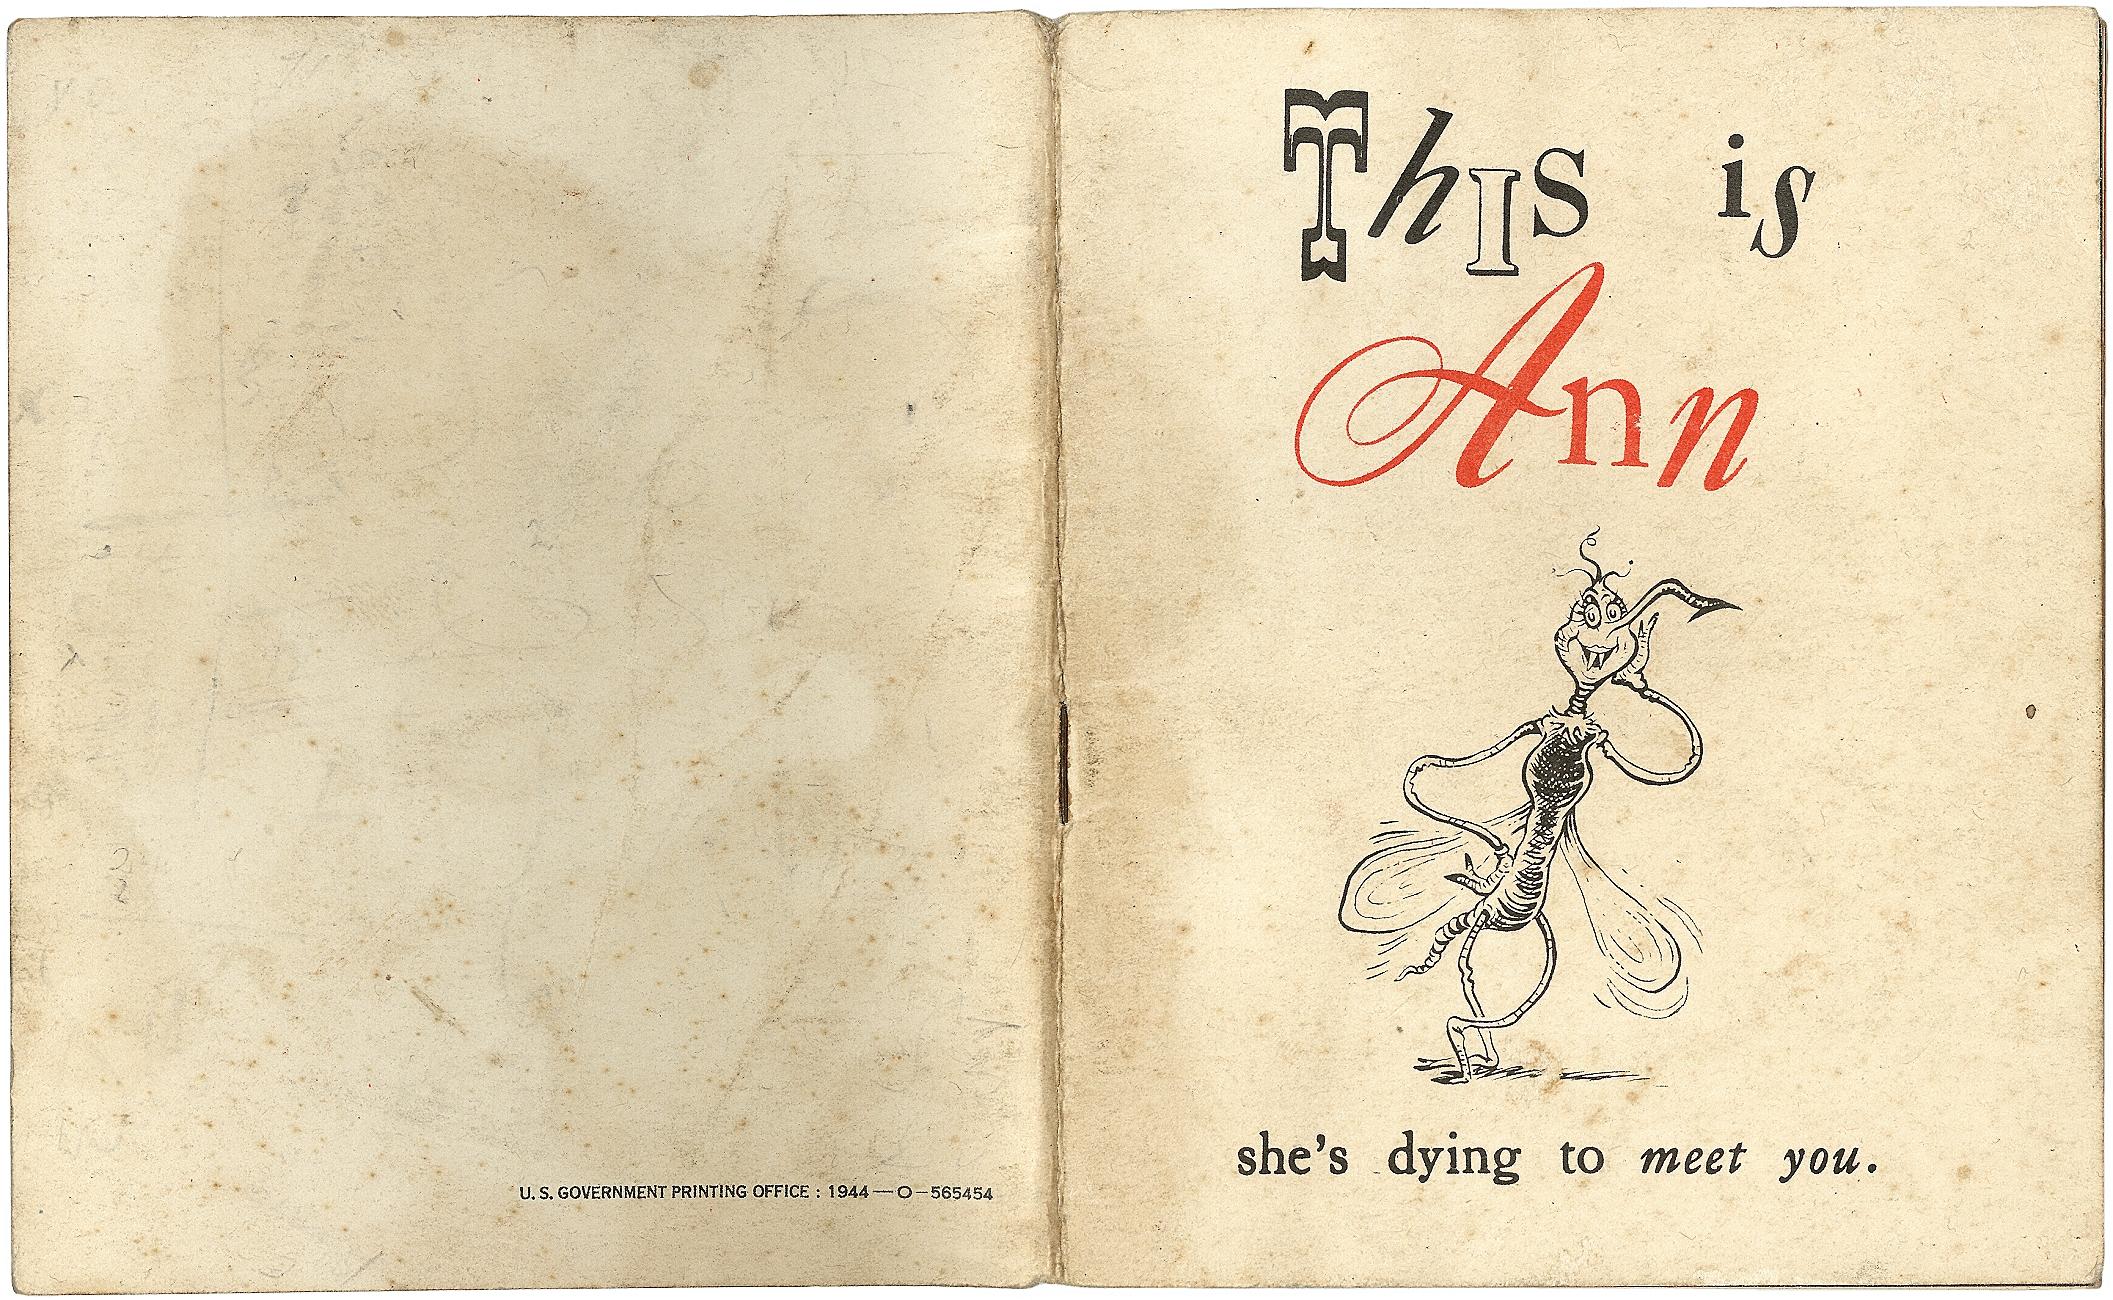 American Theodore Geisel - Dr. SEUSS - This is Ann: She's Dying to Meet You - 1944